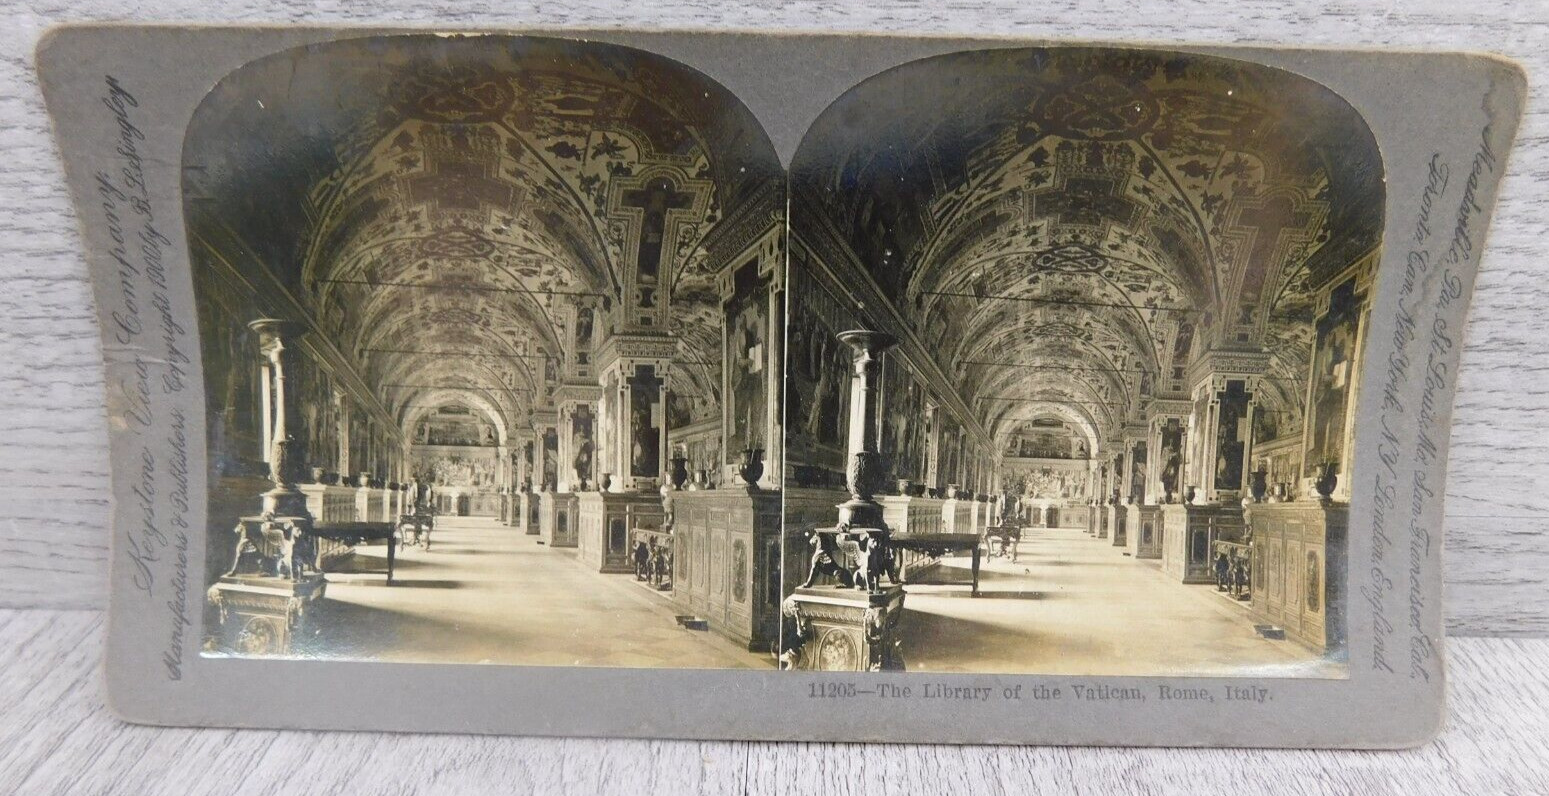 Vintage Stereoview Photo Cards Keystone View Company 1900 Vatican Rome Italy